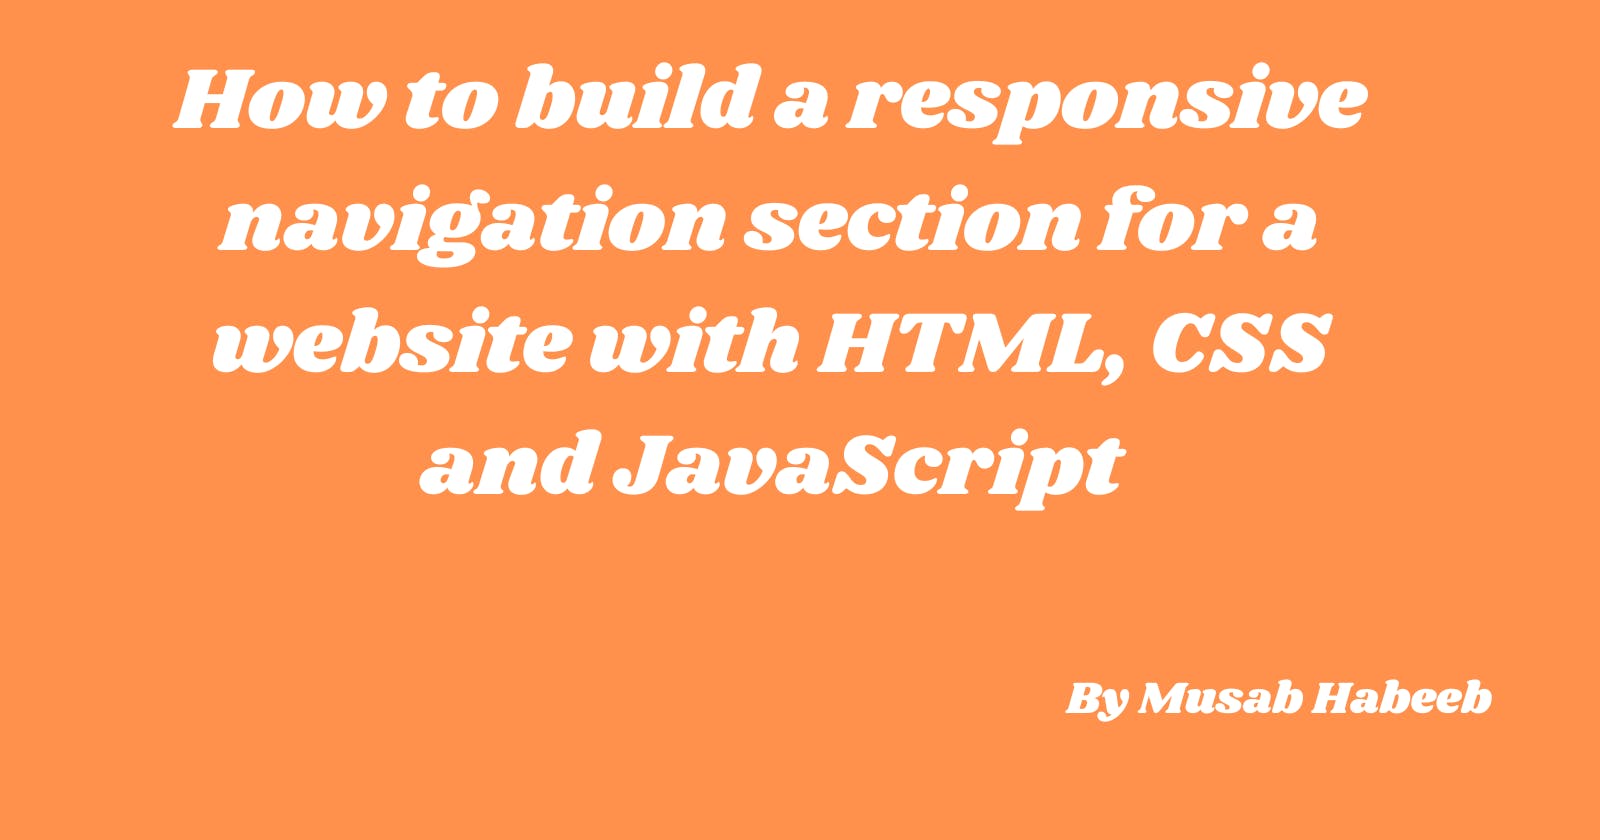 How to build a responsive navigation section for a website with HTML, CSS and JavaScript